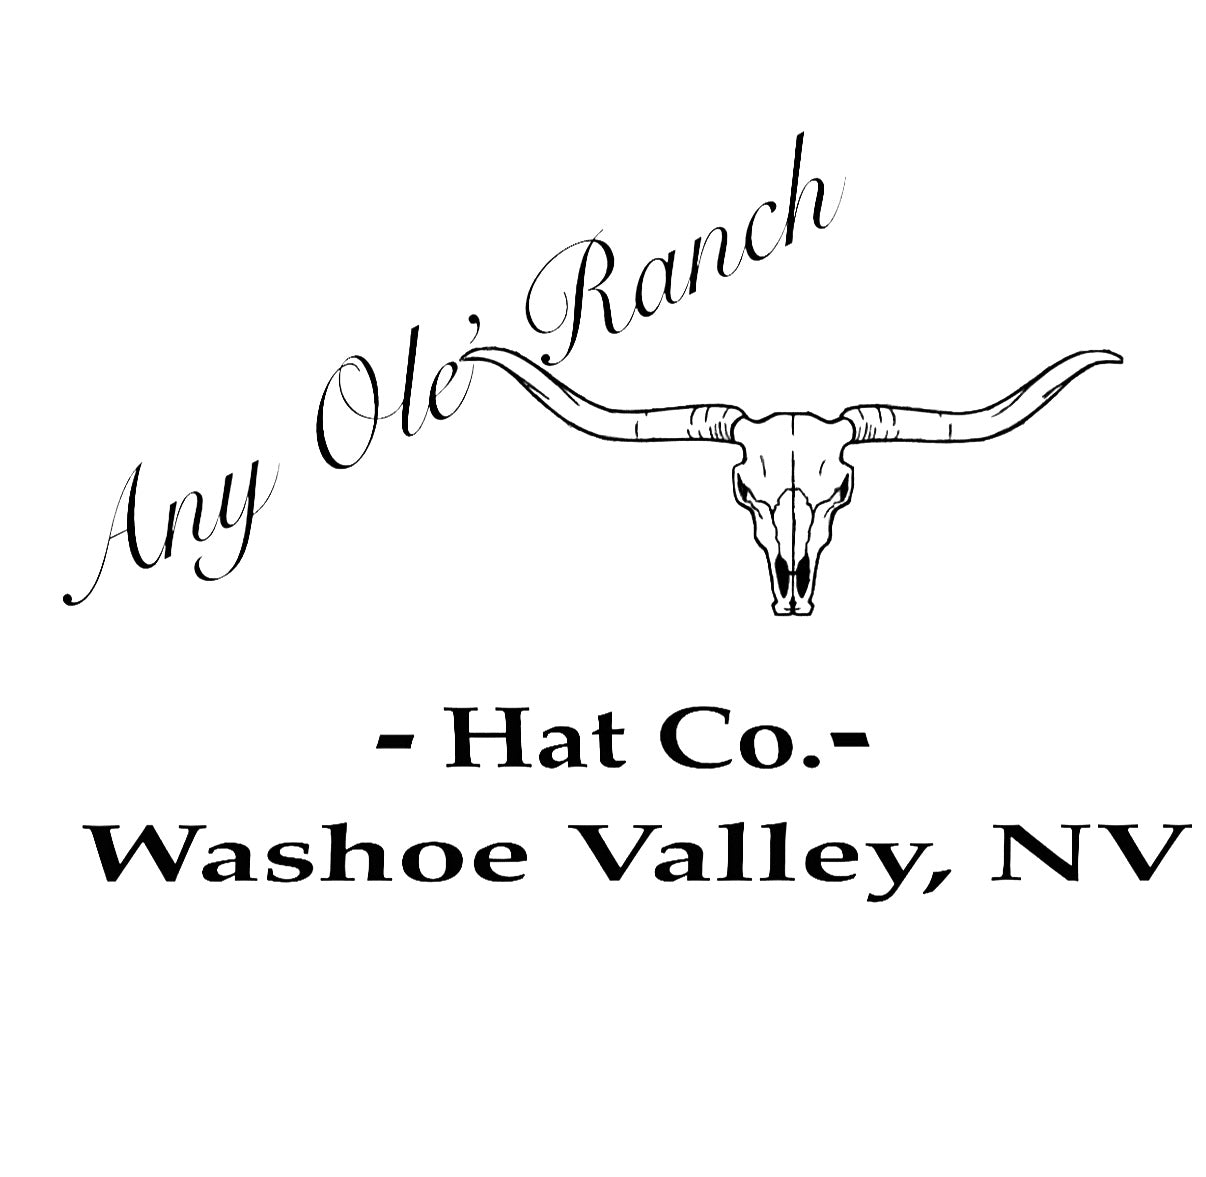 Any Ole’ Ranch Hat Co